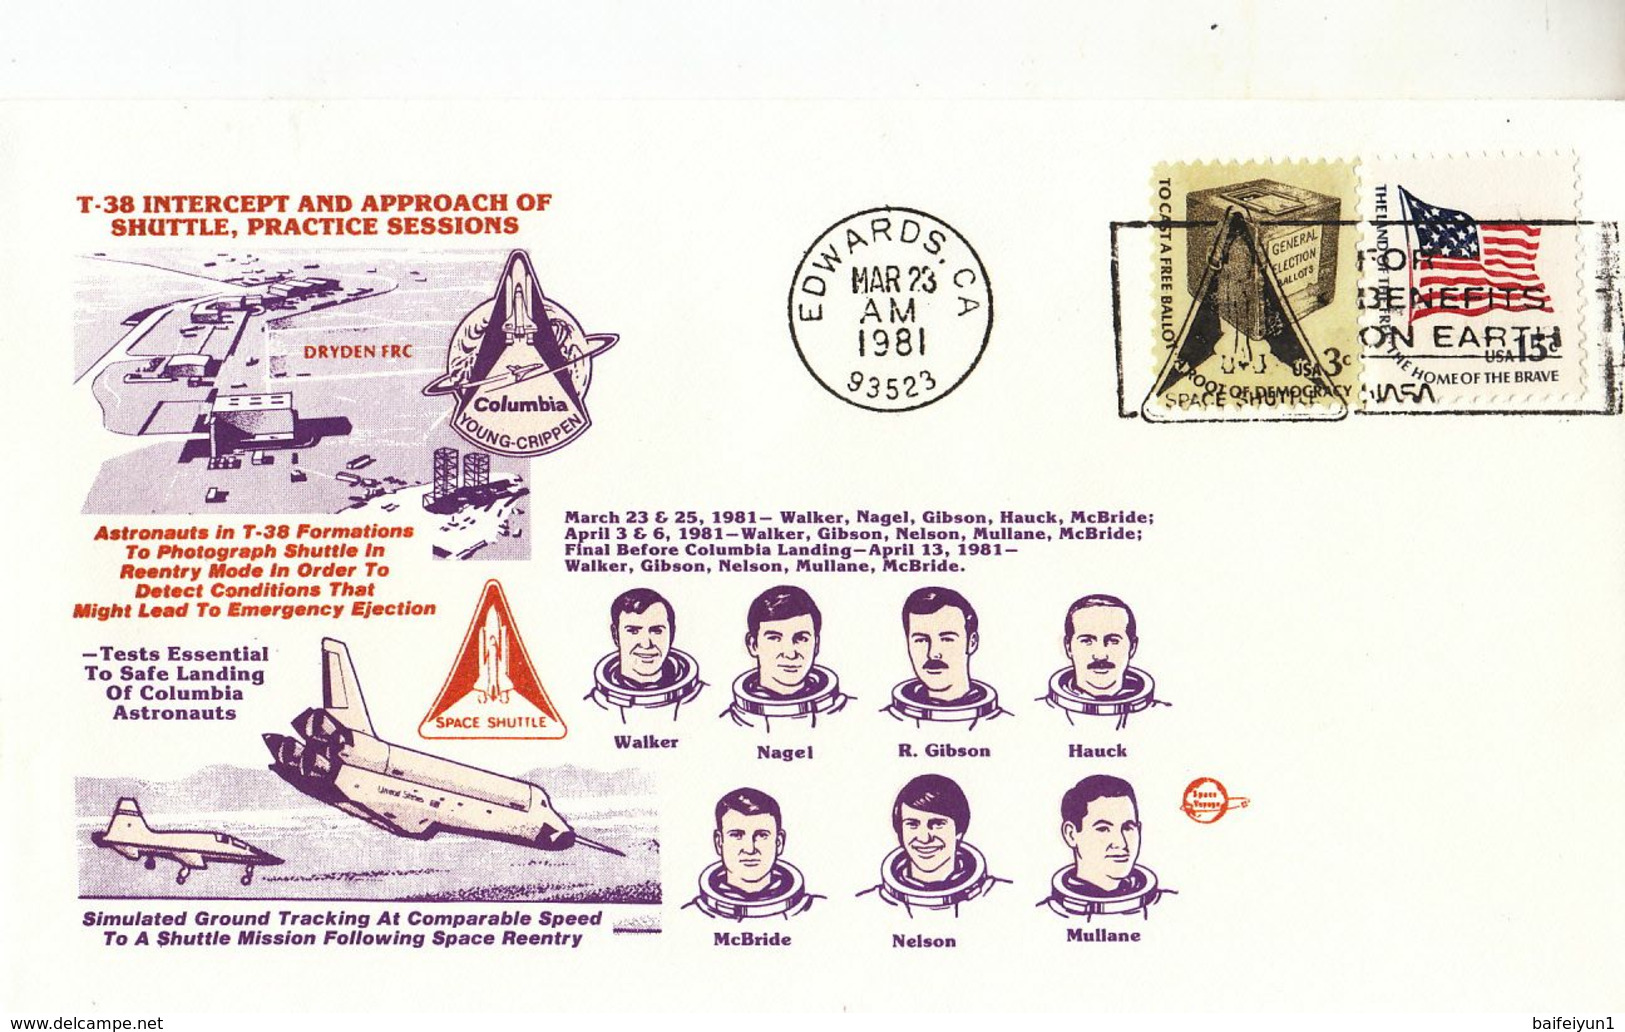 USA 1981  T-38 Intercept And Approach Of Shuttle Practice Sessions Commemorative Cover B - Nordamerika